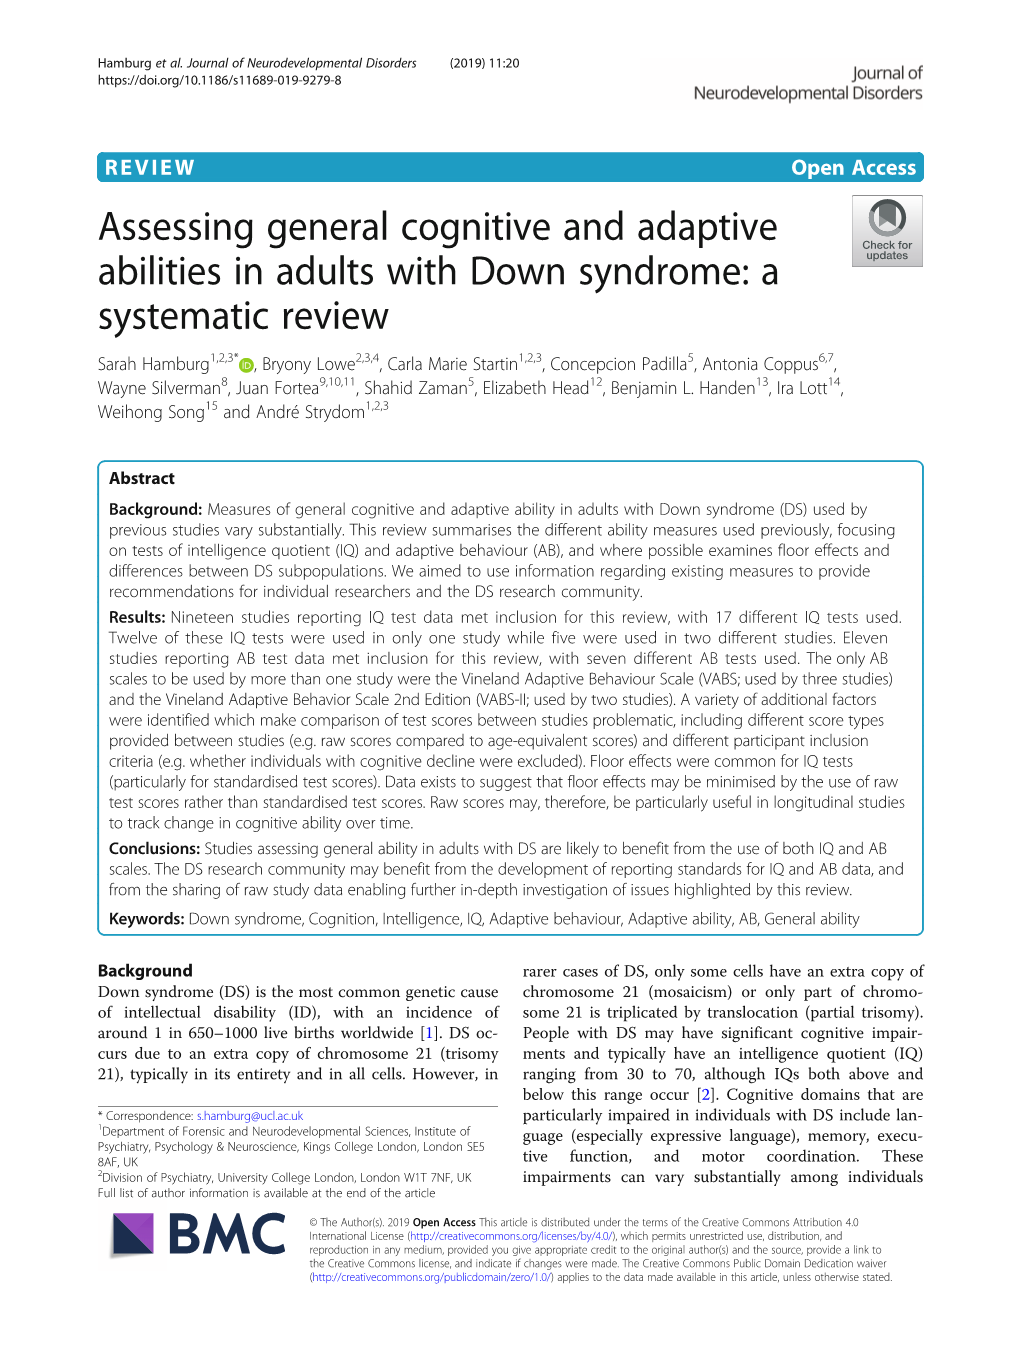 Assessing General Cognitive and Adaptive Abilities in Adults with Down Syndrome: a Systematic Review